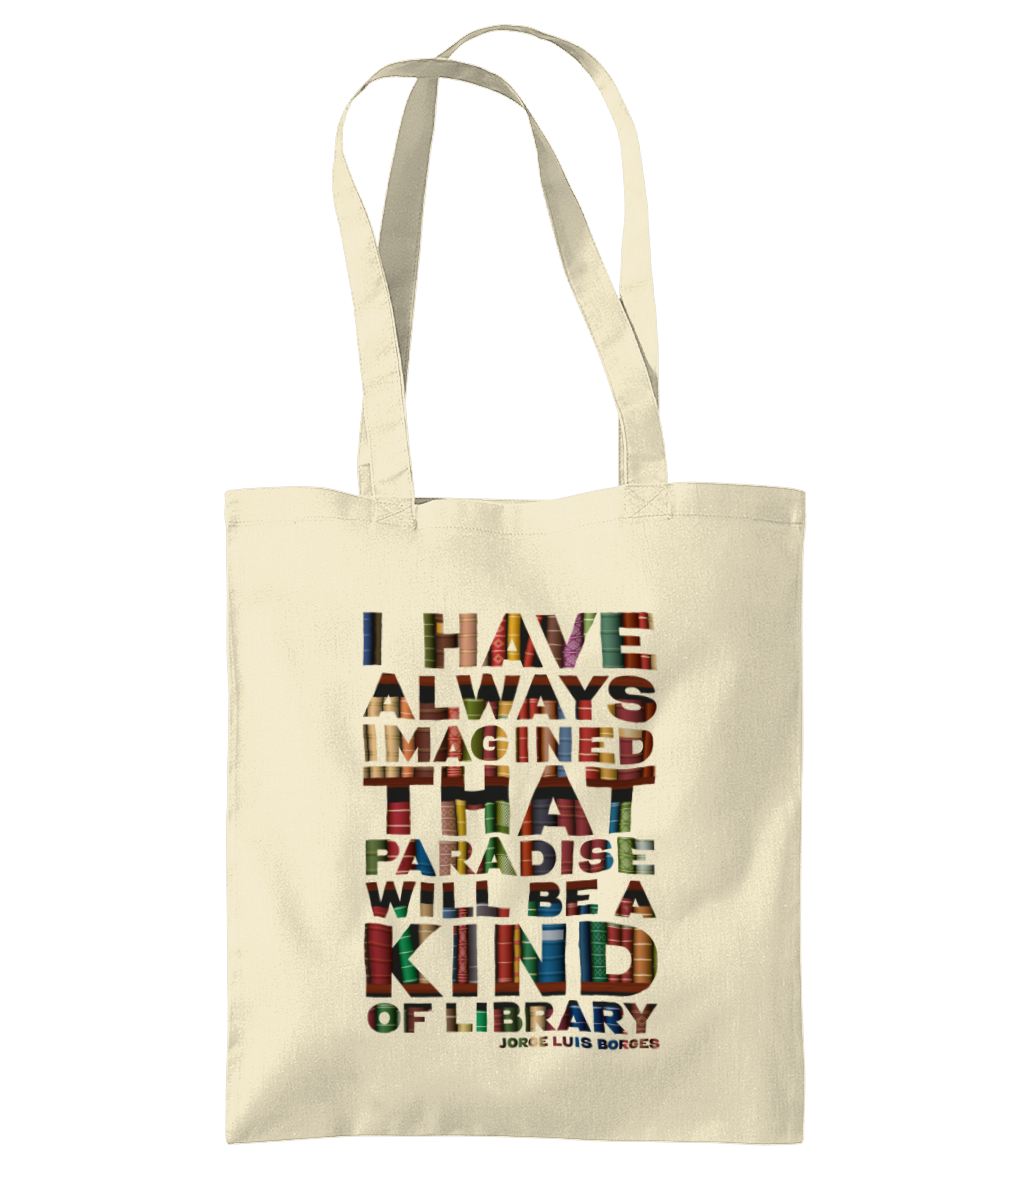 Shoulder Tote Bag Paradise featuring the quote "I have always imagined that Paradise is a kind of Library"